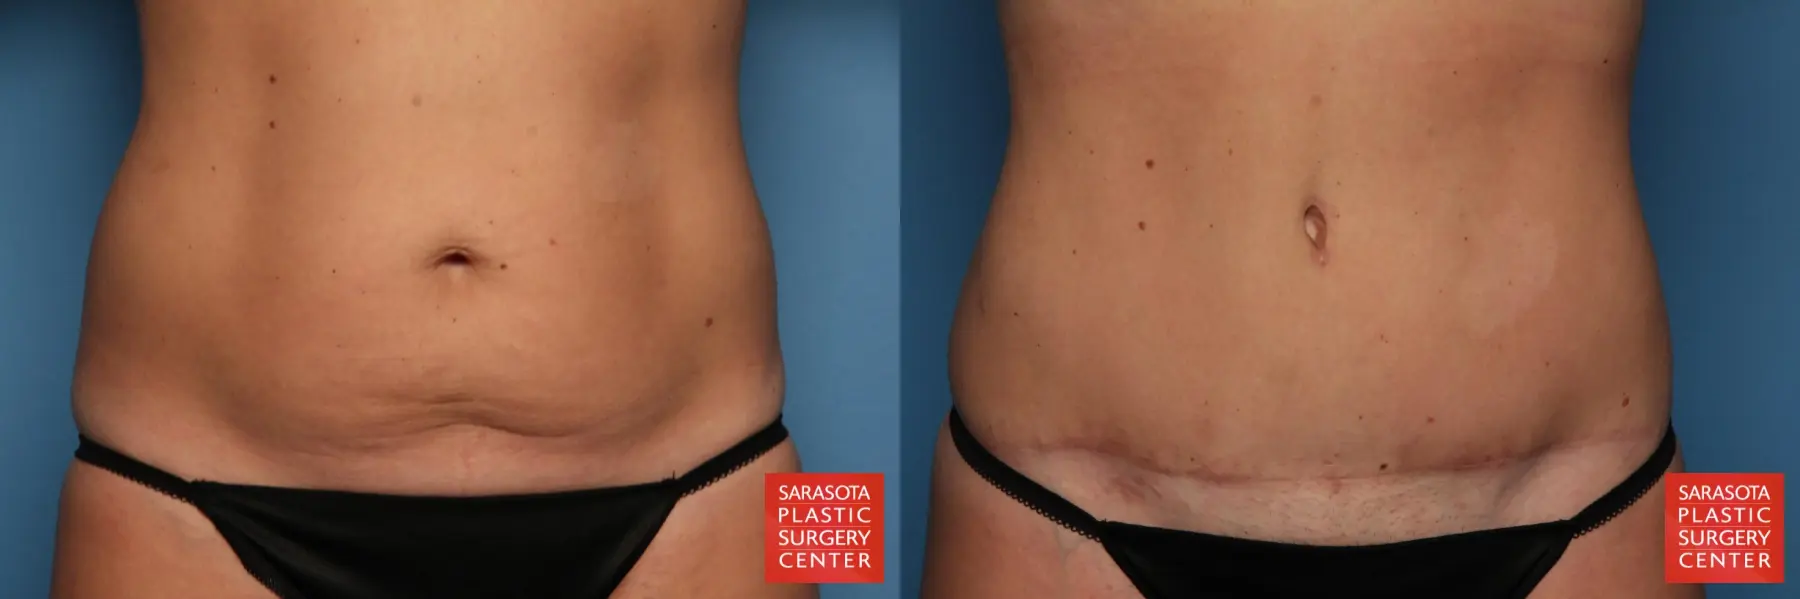 Tummy Tuck: Patient 8 - Before and After 1